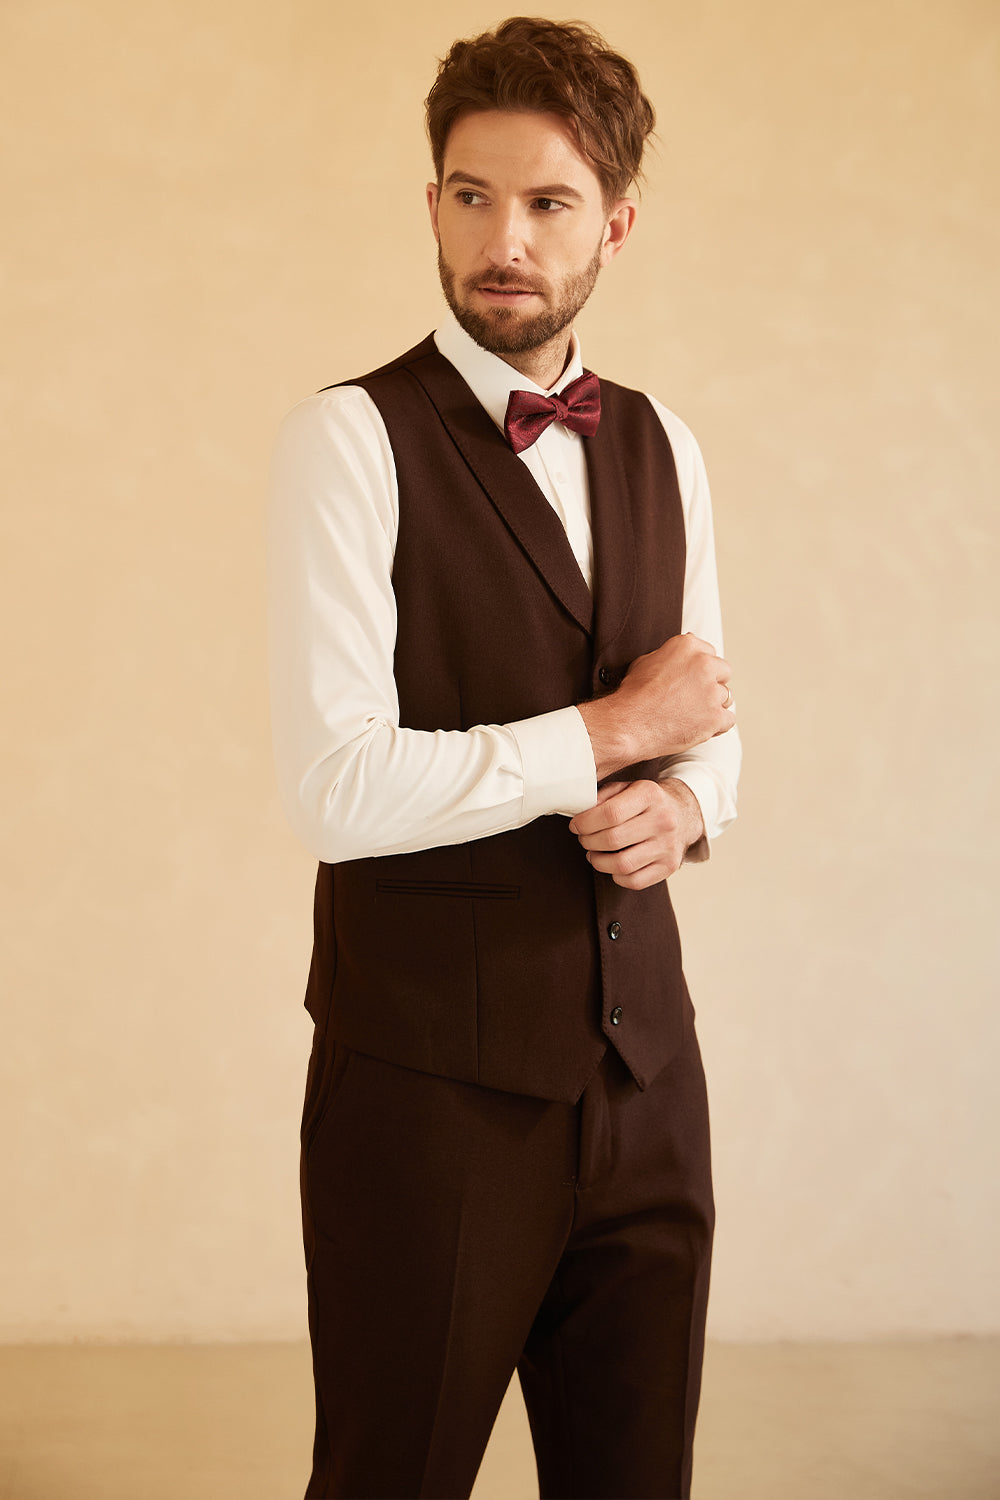 Daisda Elegant Brown Reception SuitFor Groom Peaked Lapel With One Button  36-44-Loose